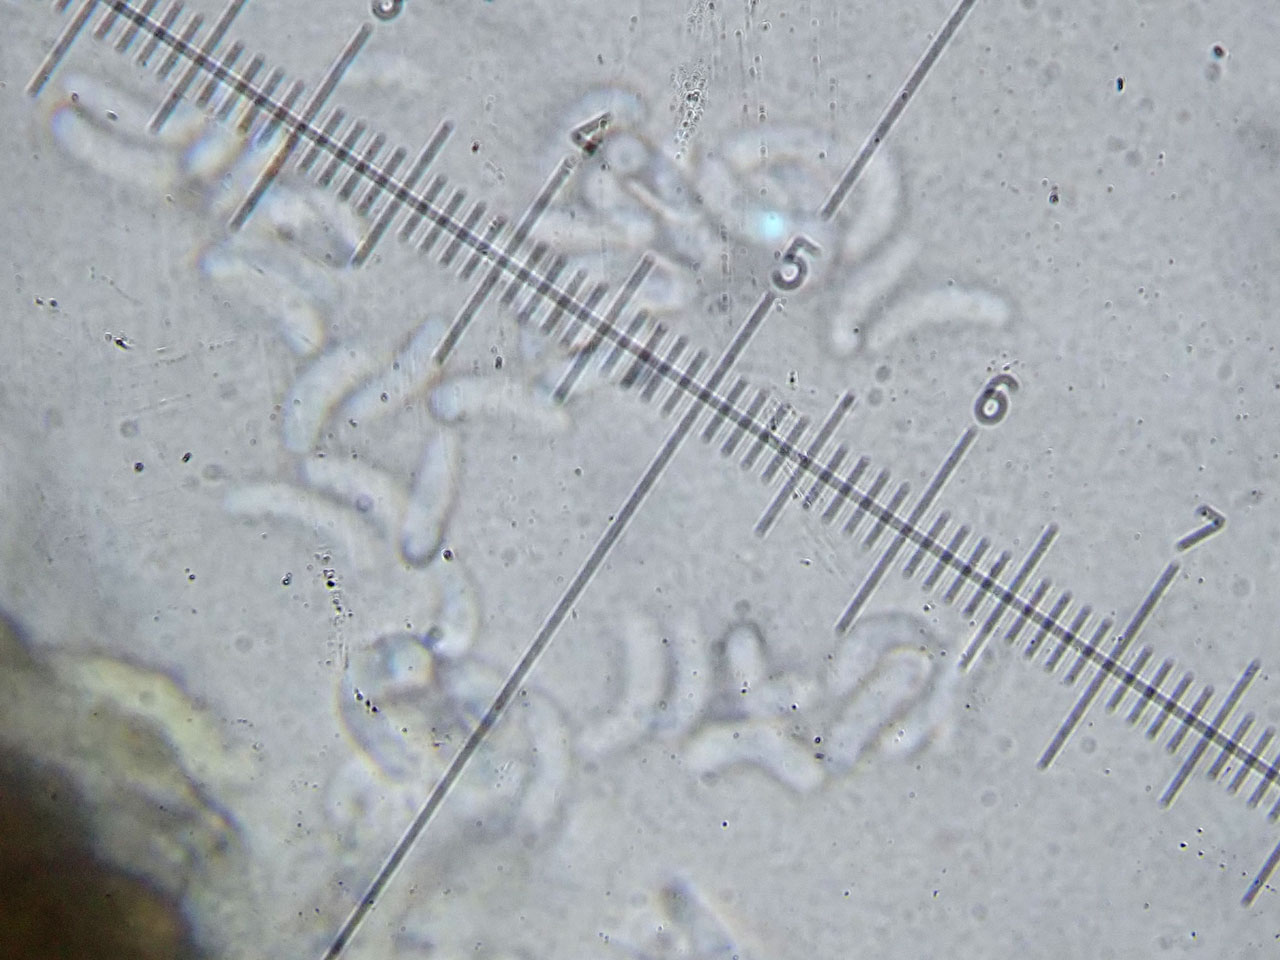 Ocellomma picconianum, conidia, Willow, Severn plain, Gloucestershire